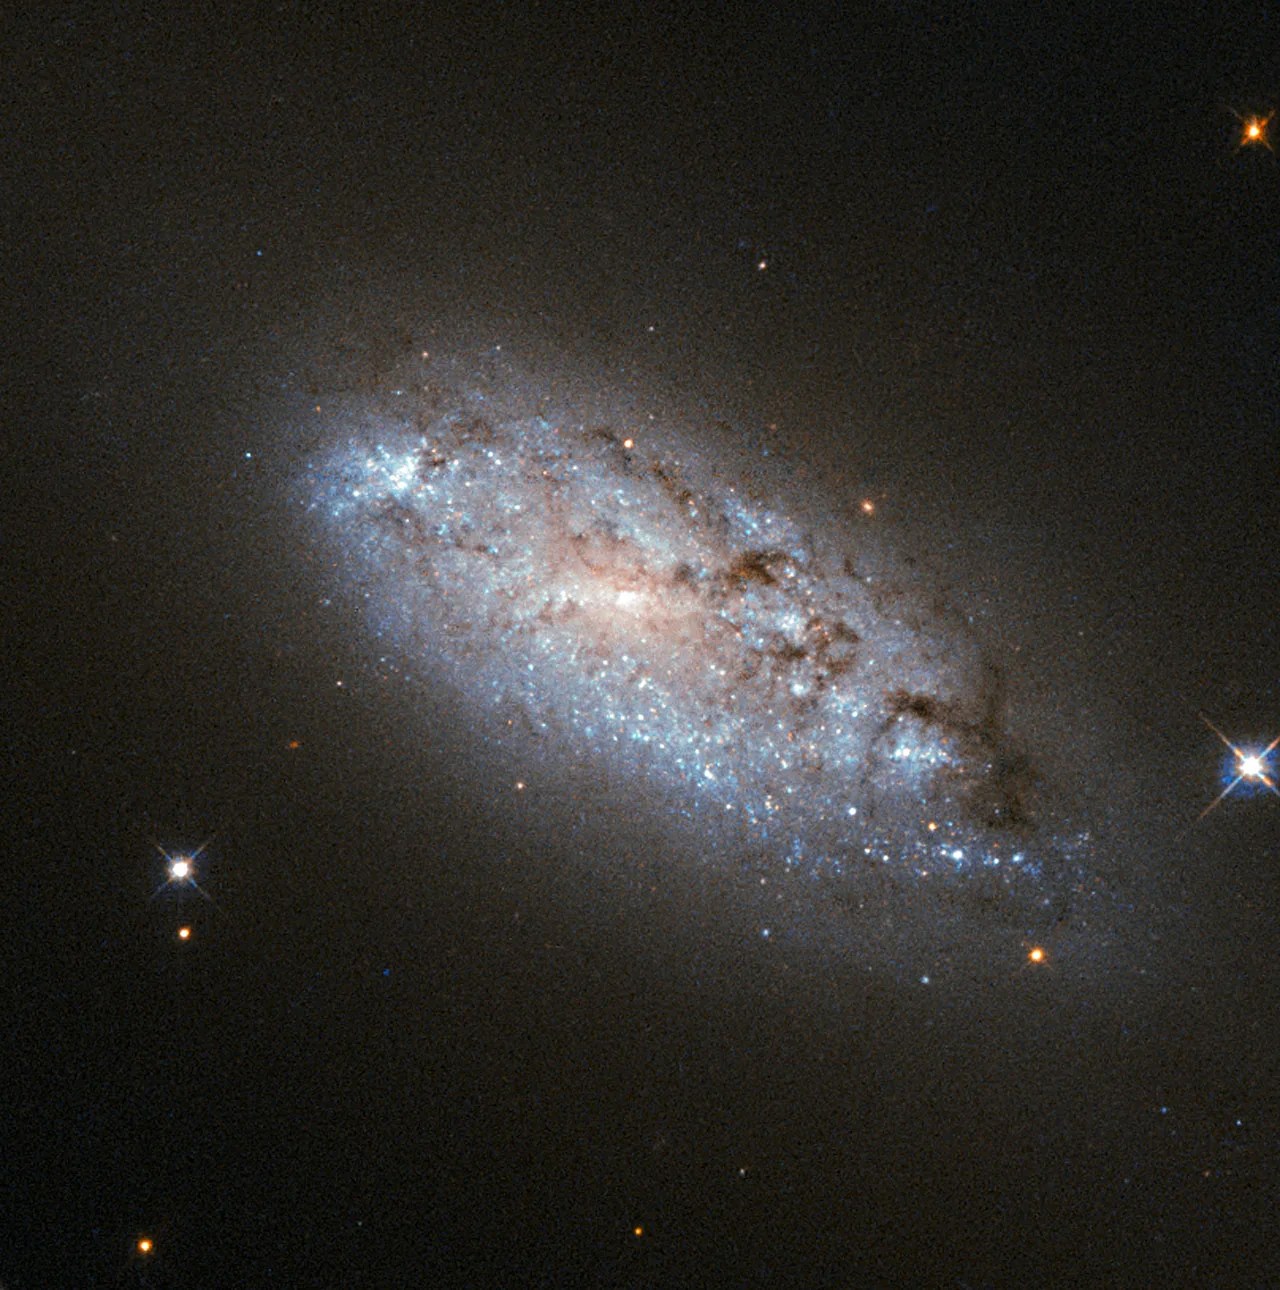 A swirl of bright stars and dust on a black background with a few bright stars